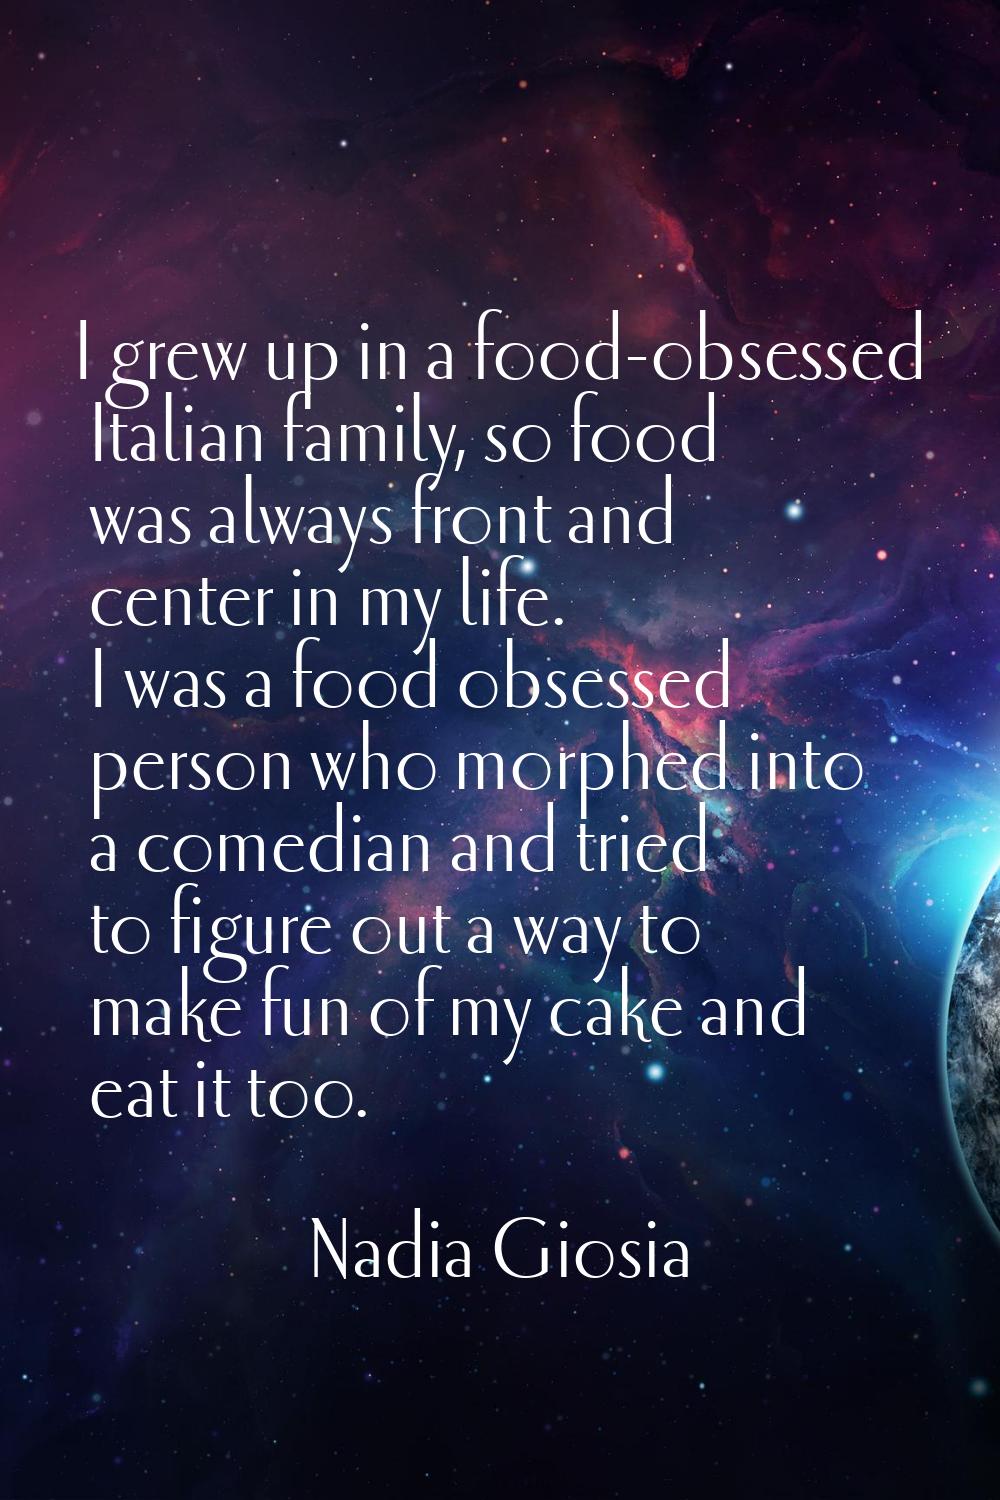 I grew up in a food-obsessed Italian family, so food was always front and center in my life. I was 